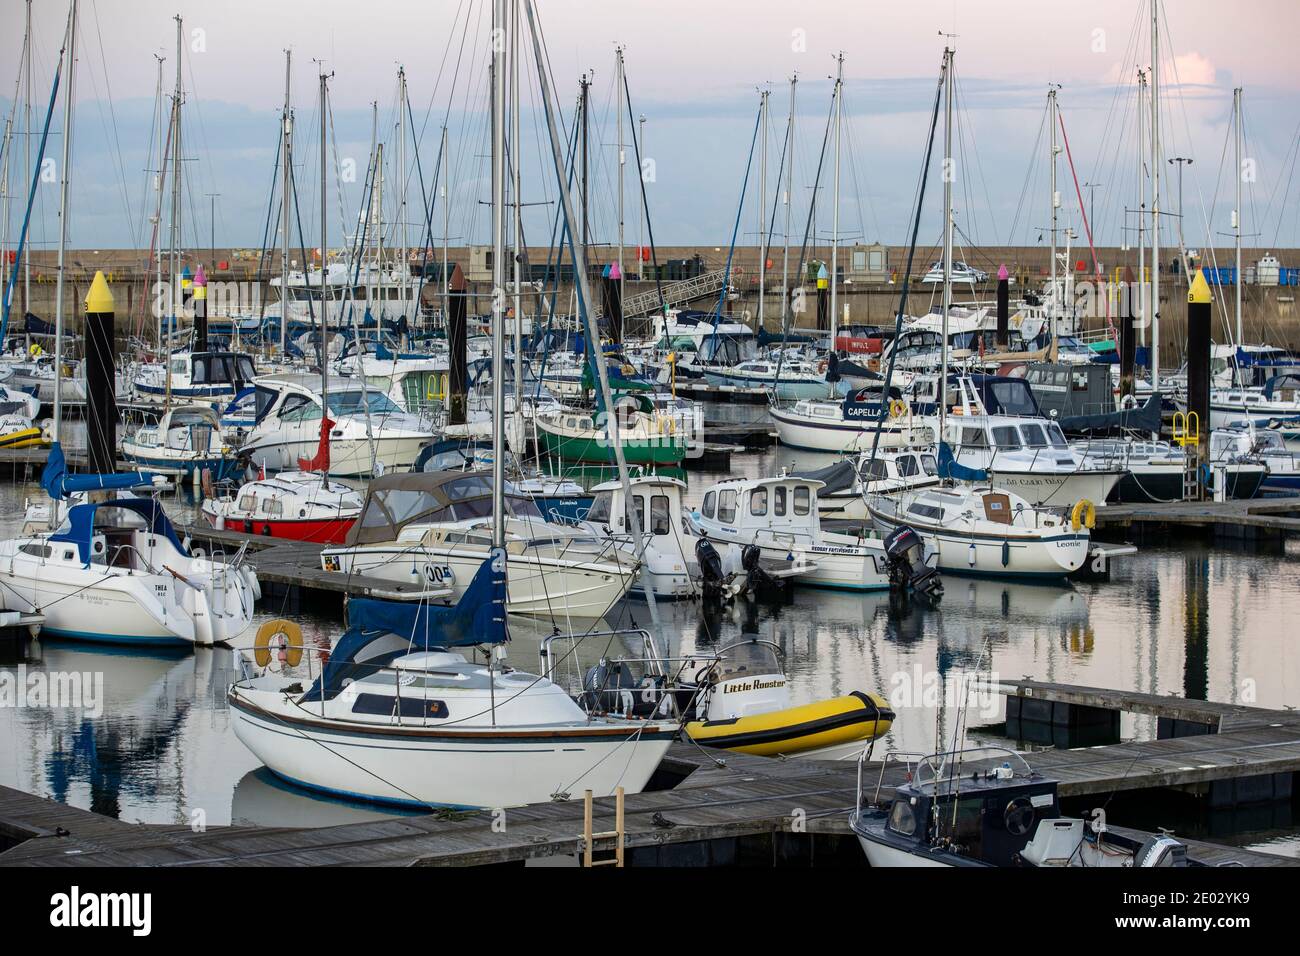 Bangor Marina in Northern Ireland. Potential sightings of UFOs, including a man who said he had been delivered to Bangor Marina by extraterrestrials, were made to the PSNI this year. Stock Photo